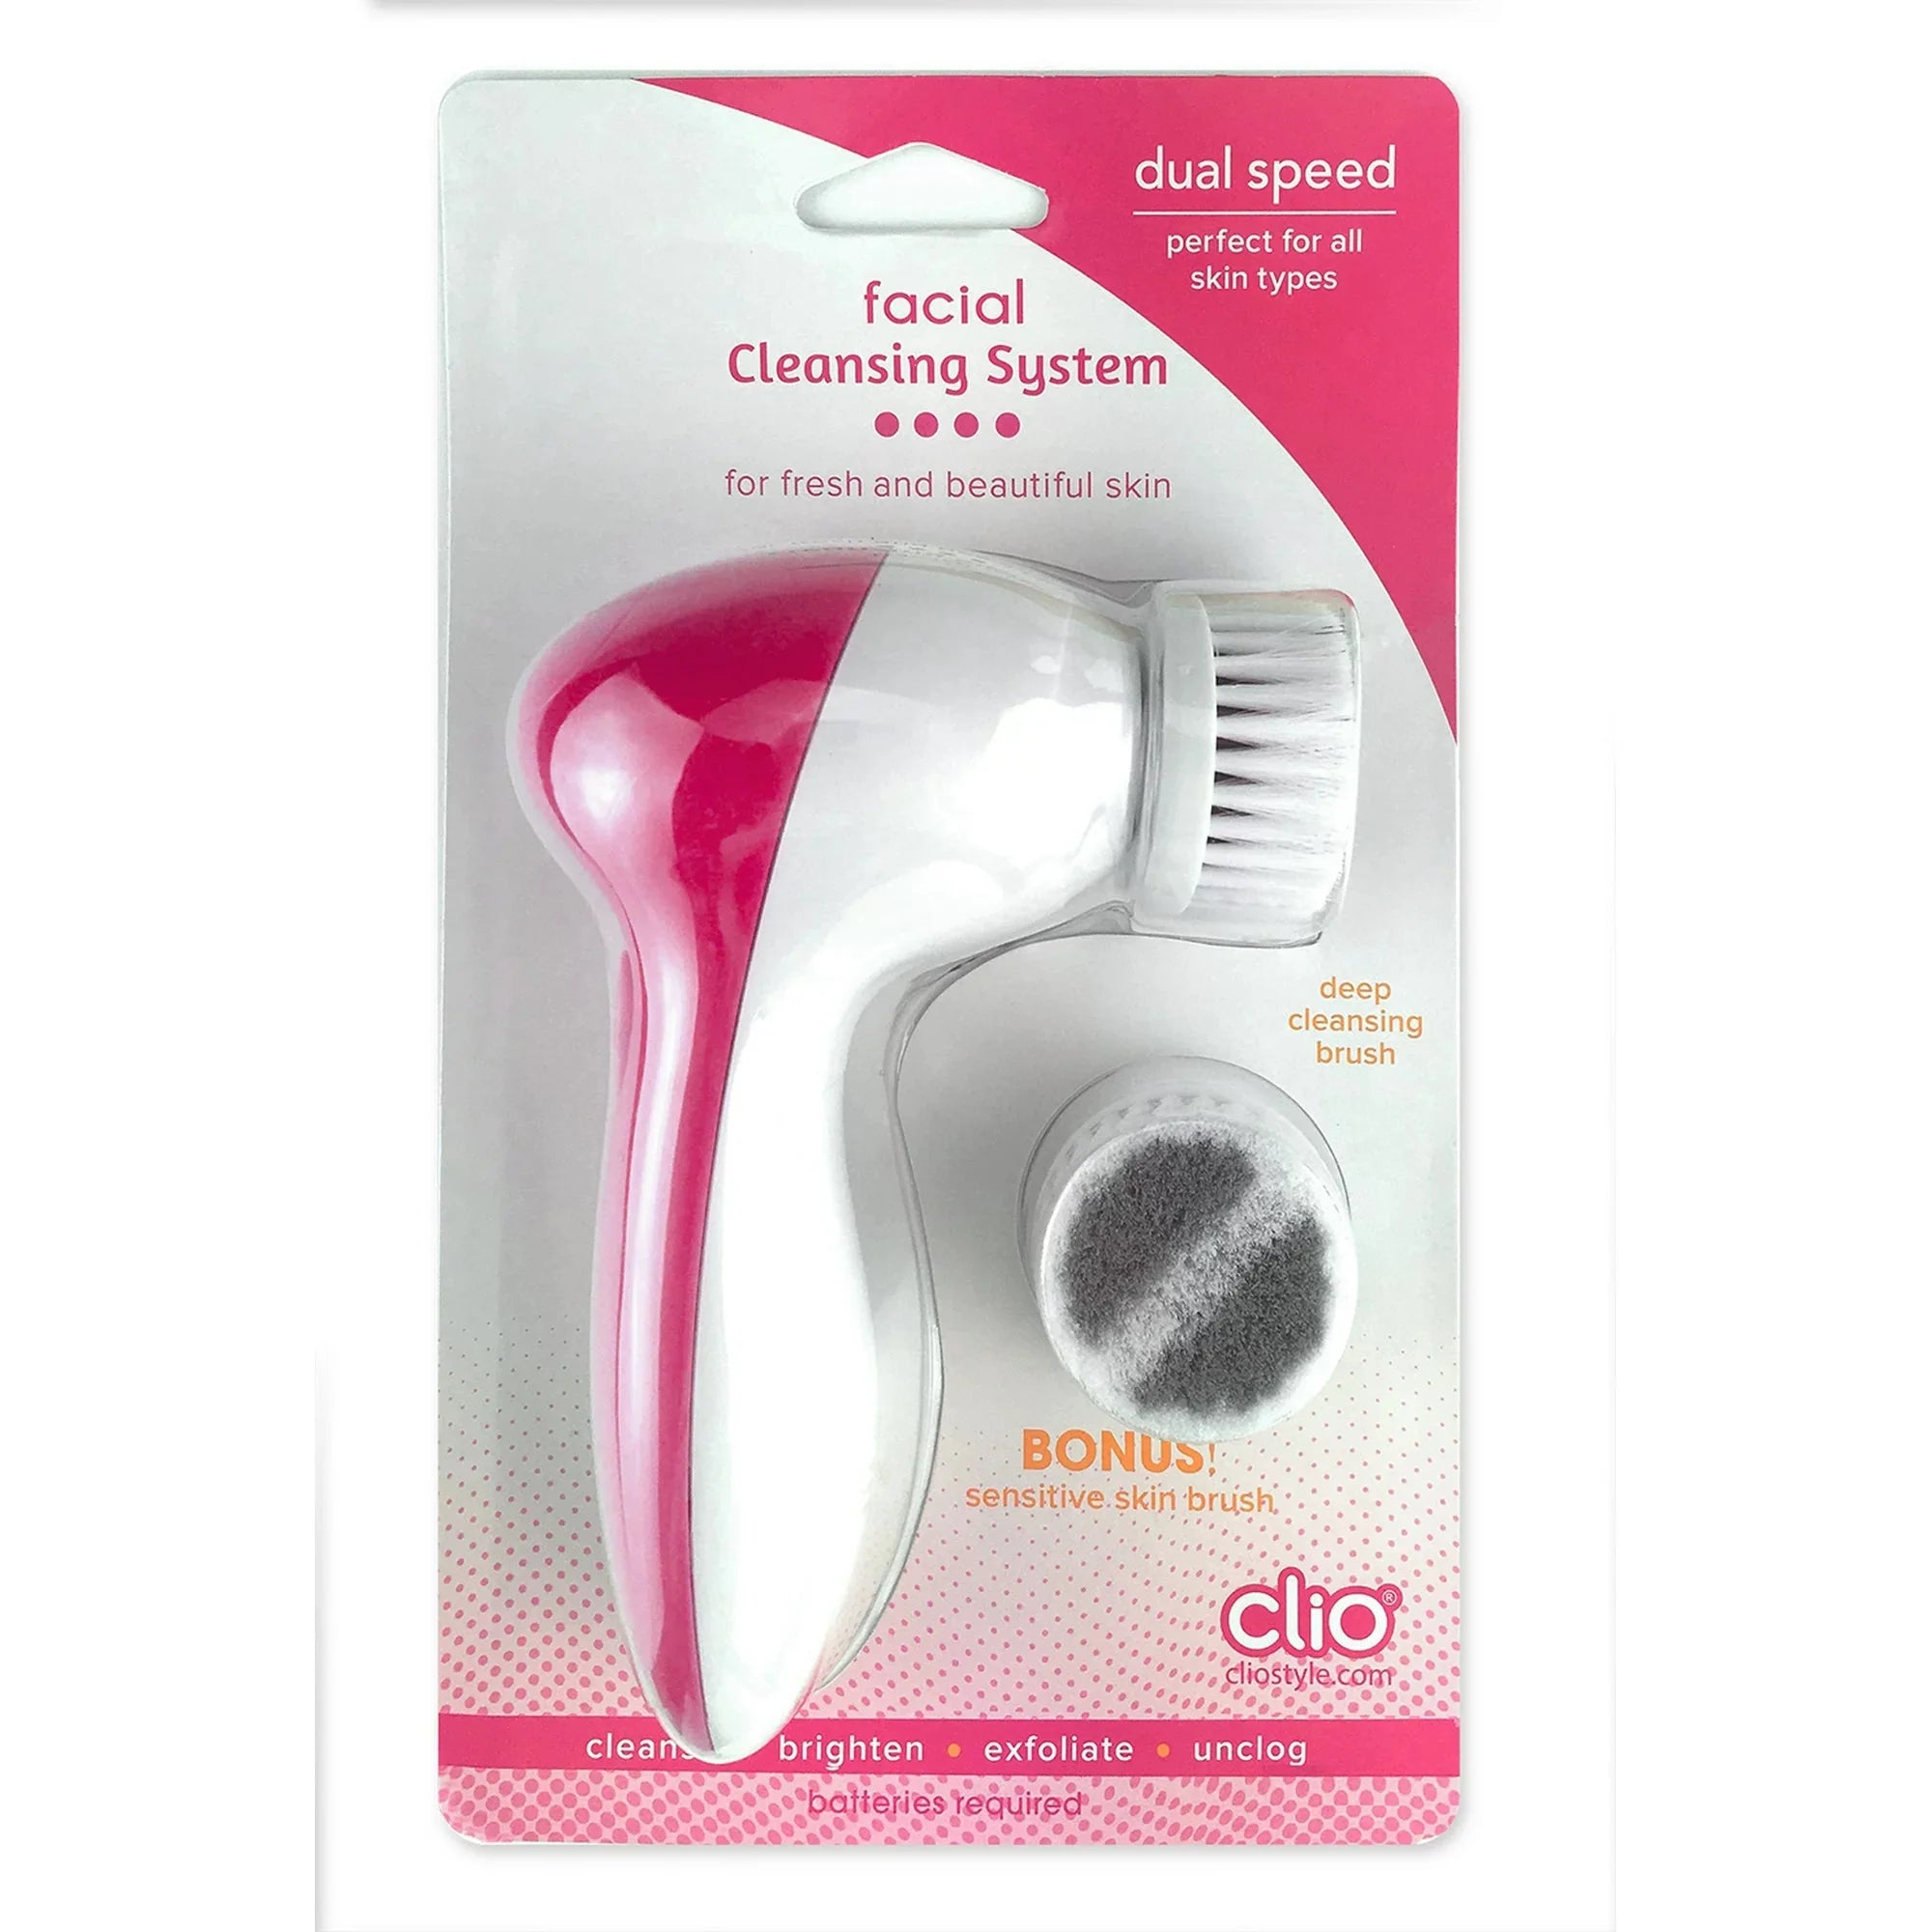 Wholesale prices with free shipping all over United States Clio Facial Cleansing System, Pink, Water Resistant, Facial Cleansing Brushes - Steven Deals